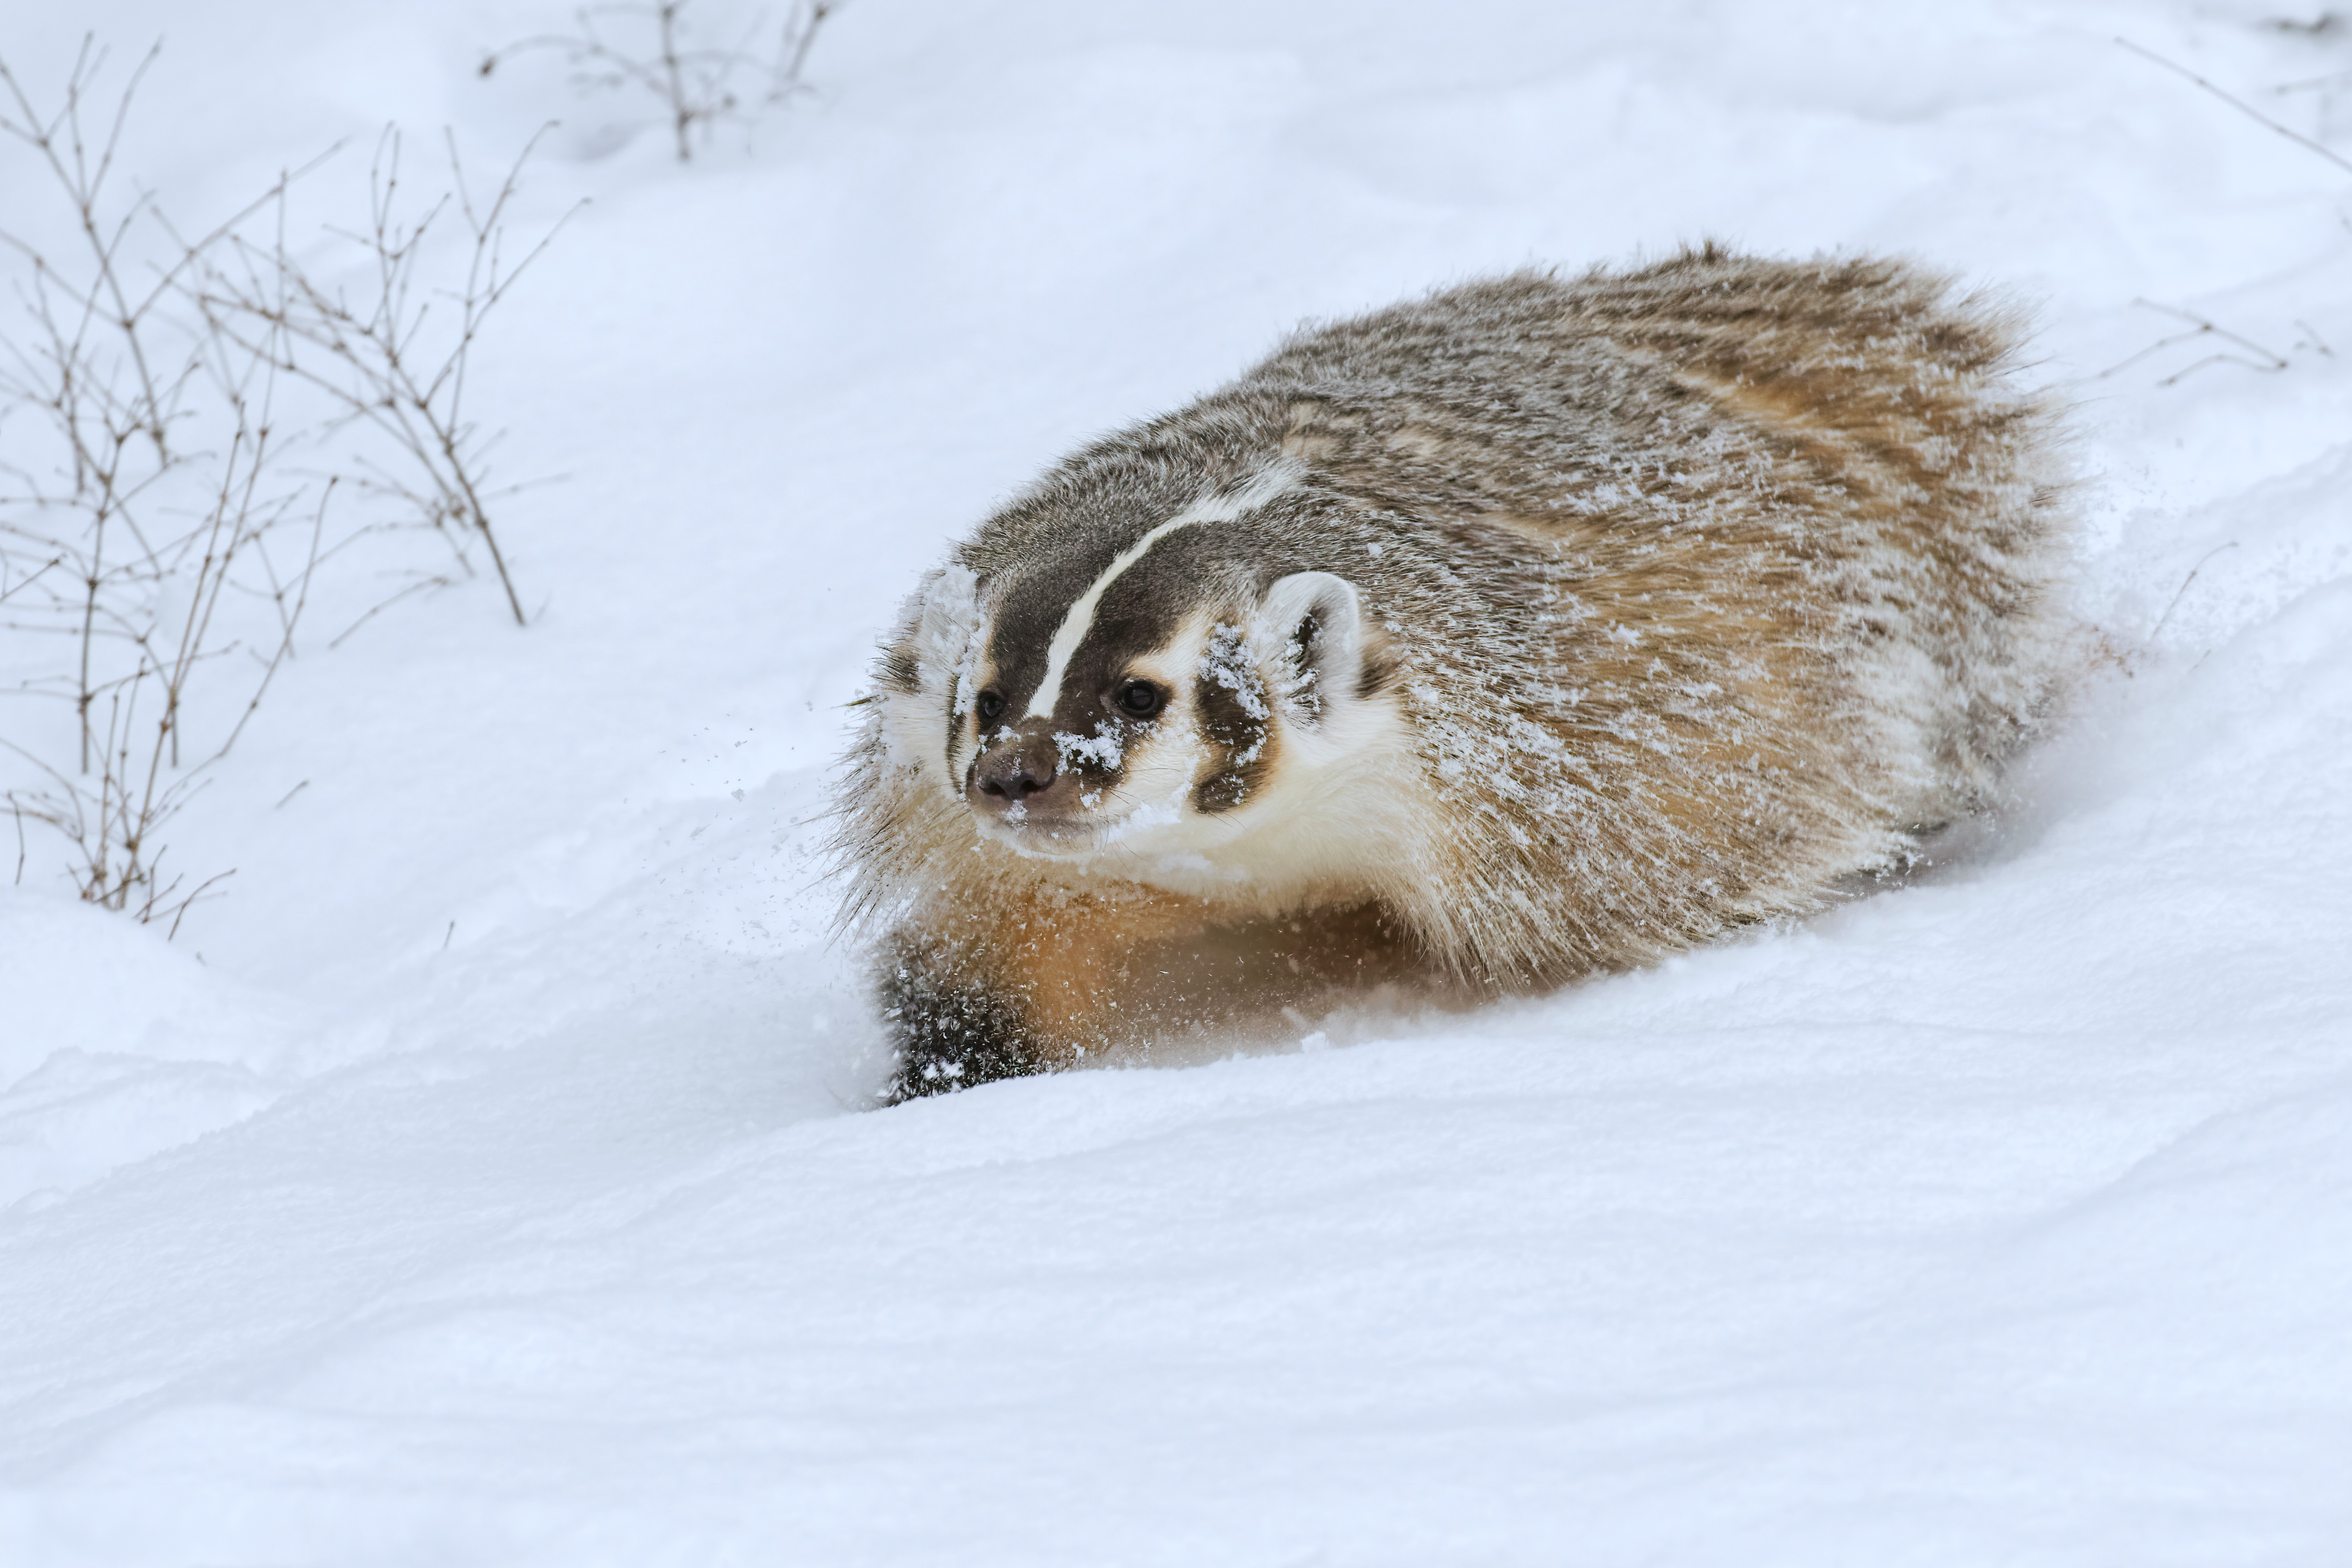 An American badger in the snow.